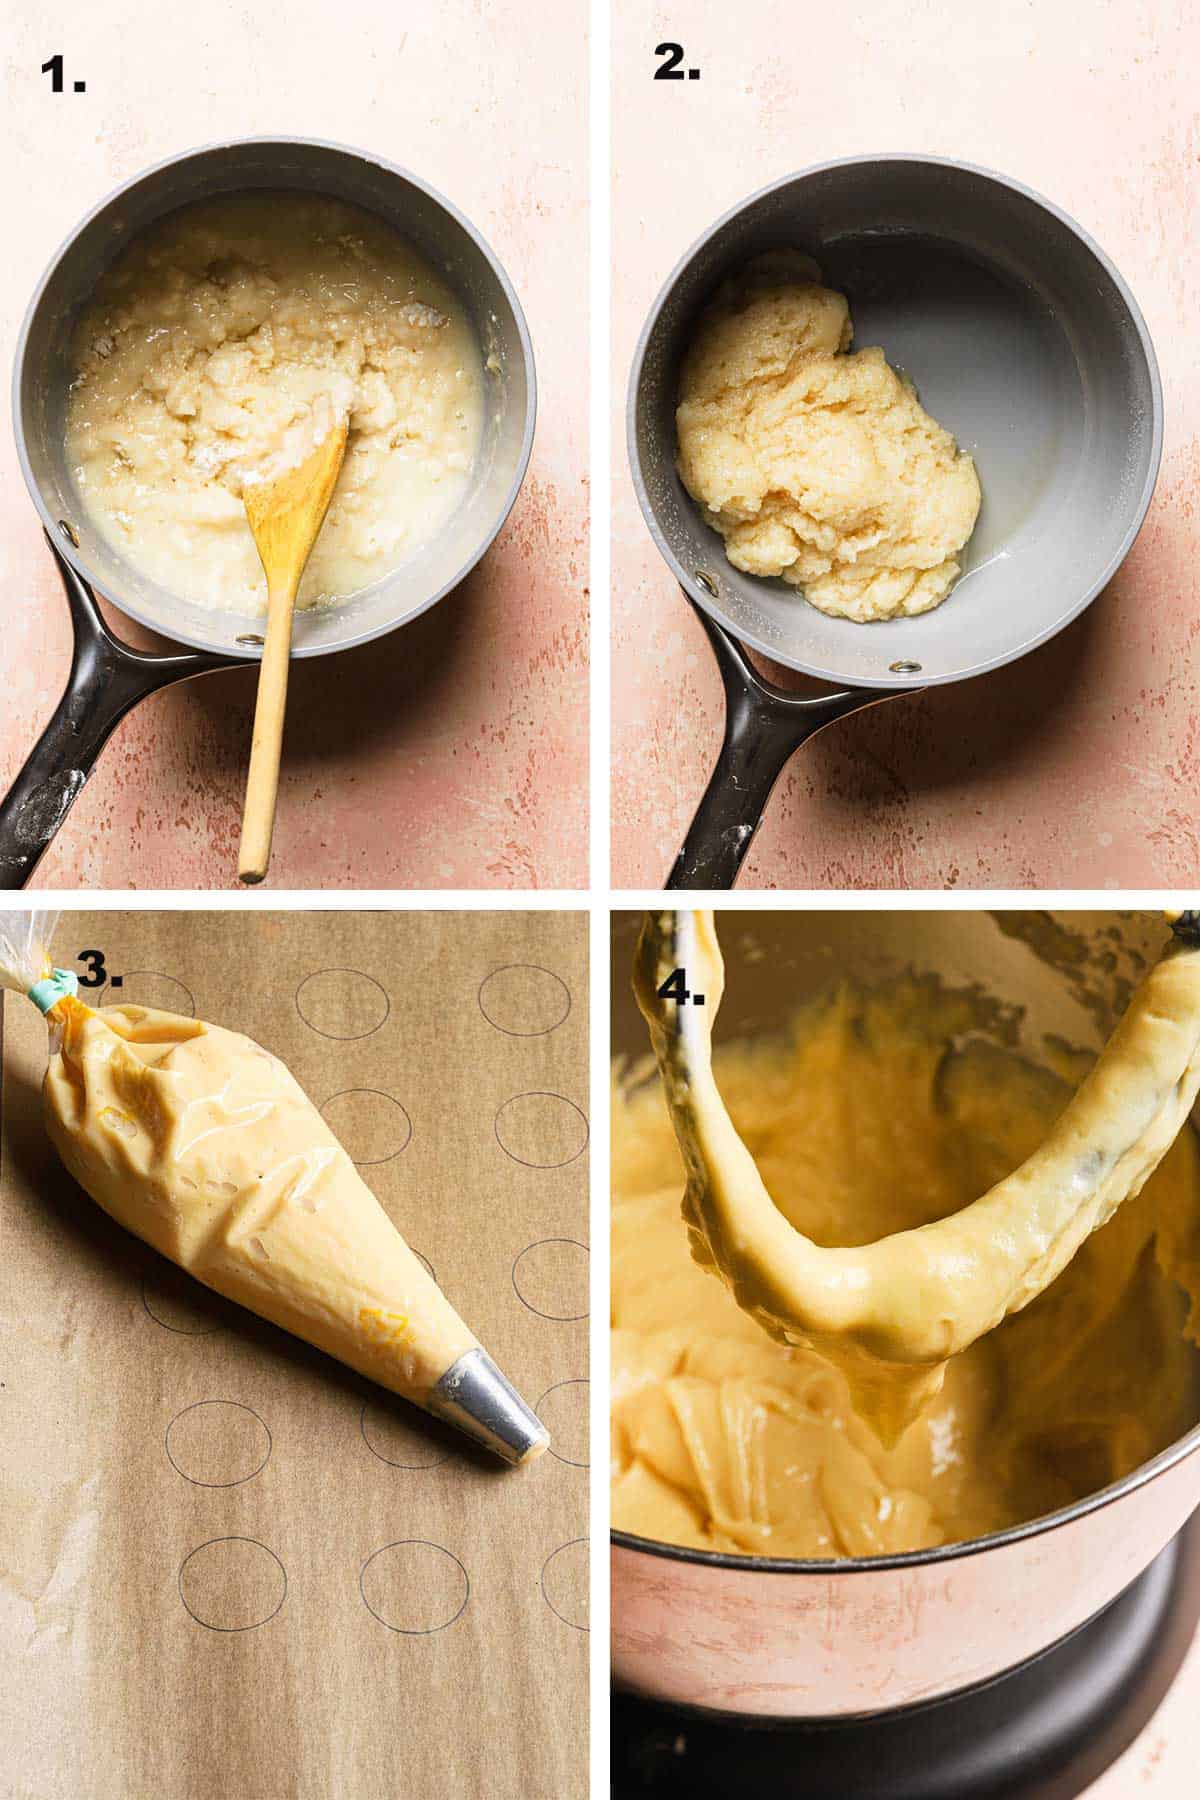 Step by step how to make choux pastry.